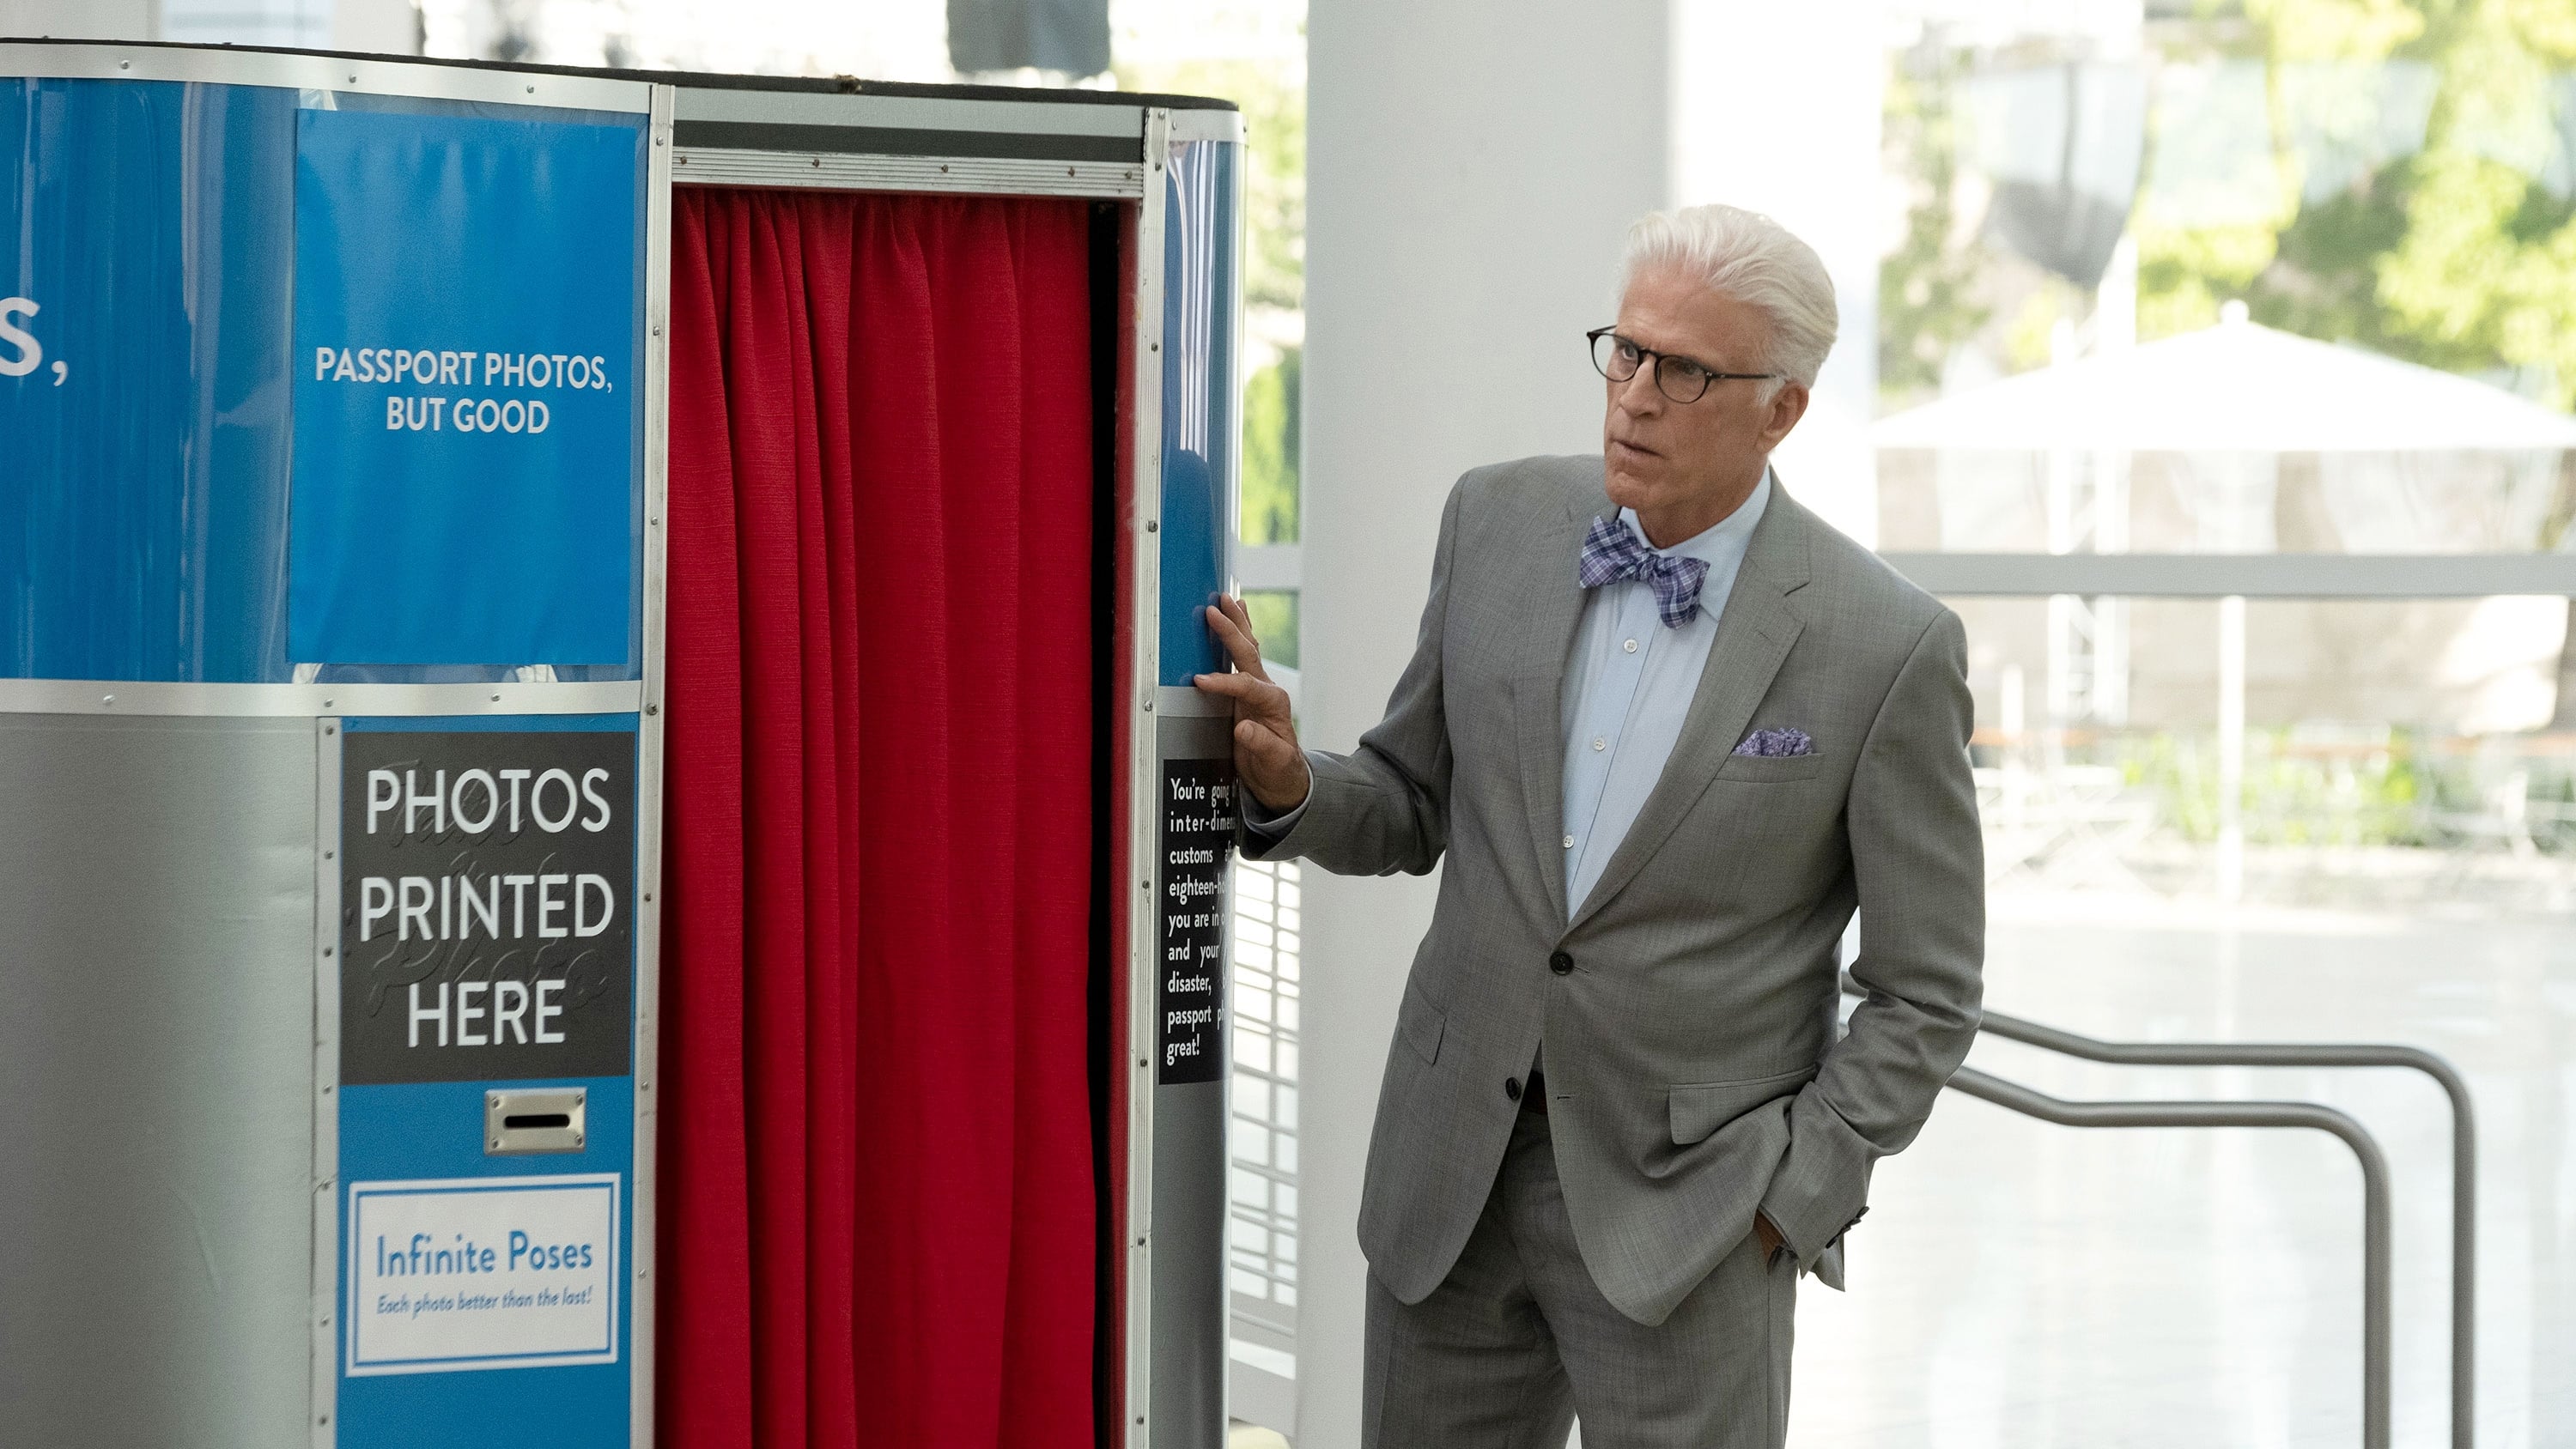 Watch The Good Place Season 4 Episode 12 Online Free At Project